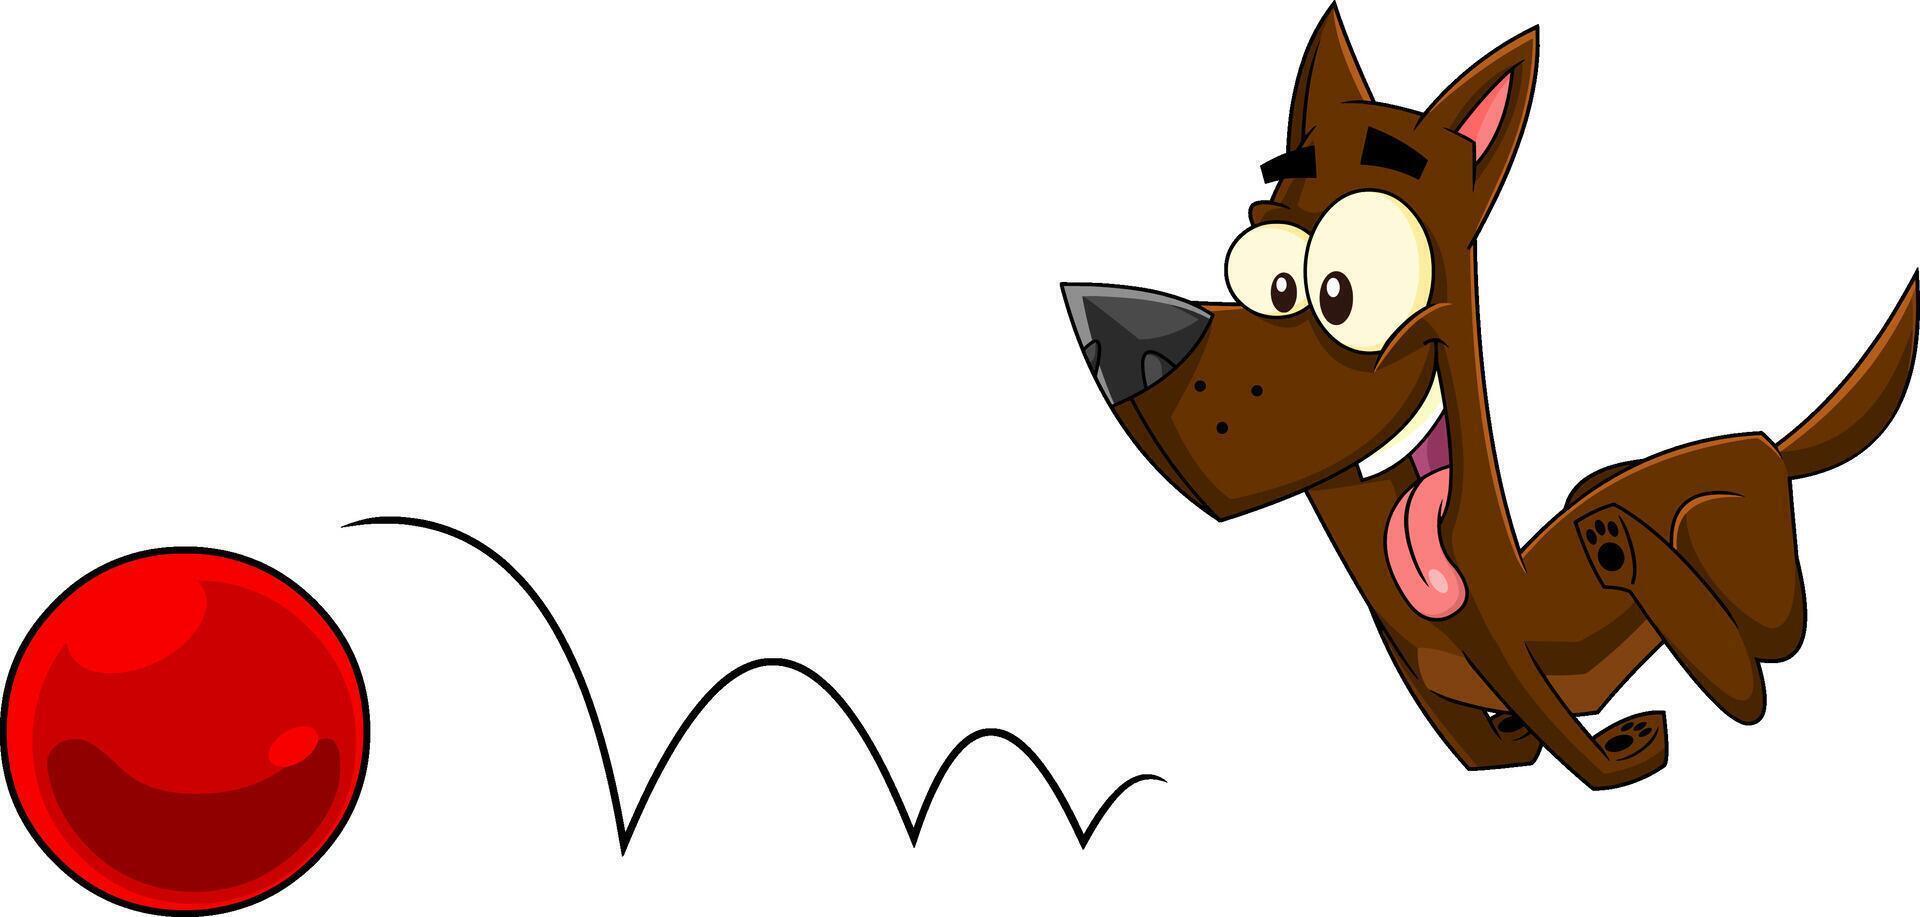 Outlined Dog Cartoon Character Chasing A Ball vector